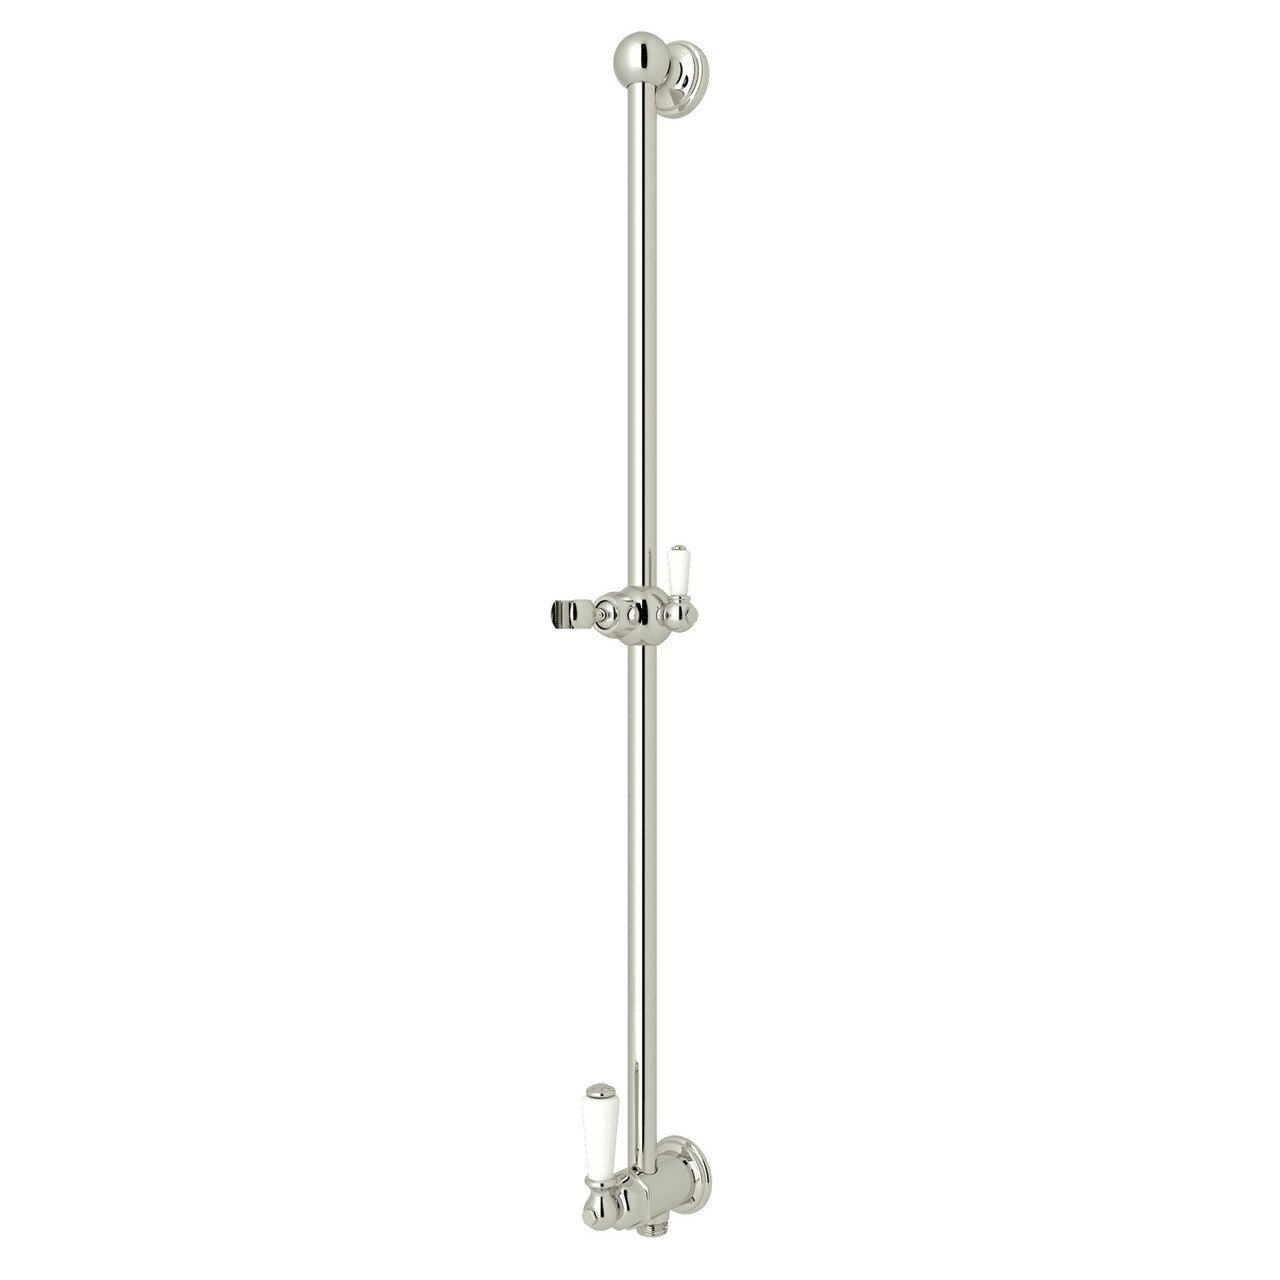 Perrin & Rowe Edwardian Shower Bar with Integrated Volume Control and Outlet - BNGBath